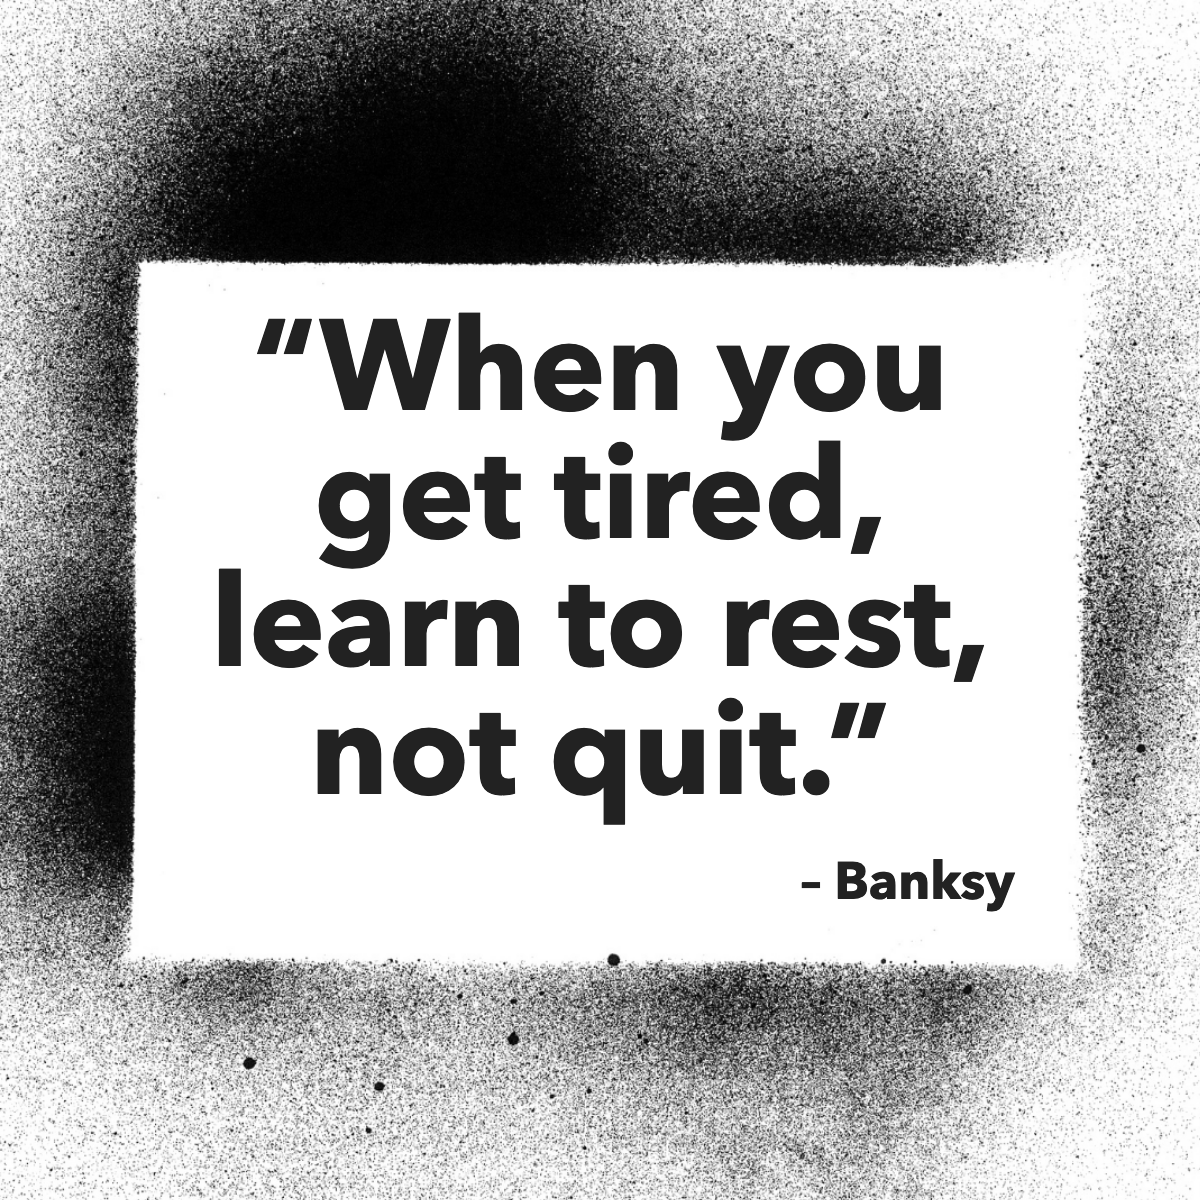 Don't feel guilty if you ever get tired, take your time ... 😉

#motivationnation #motivationalquotesdaily #quoteoftheday #quoteofday #quotedaily

 #columbusohio